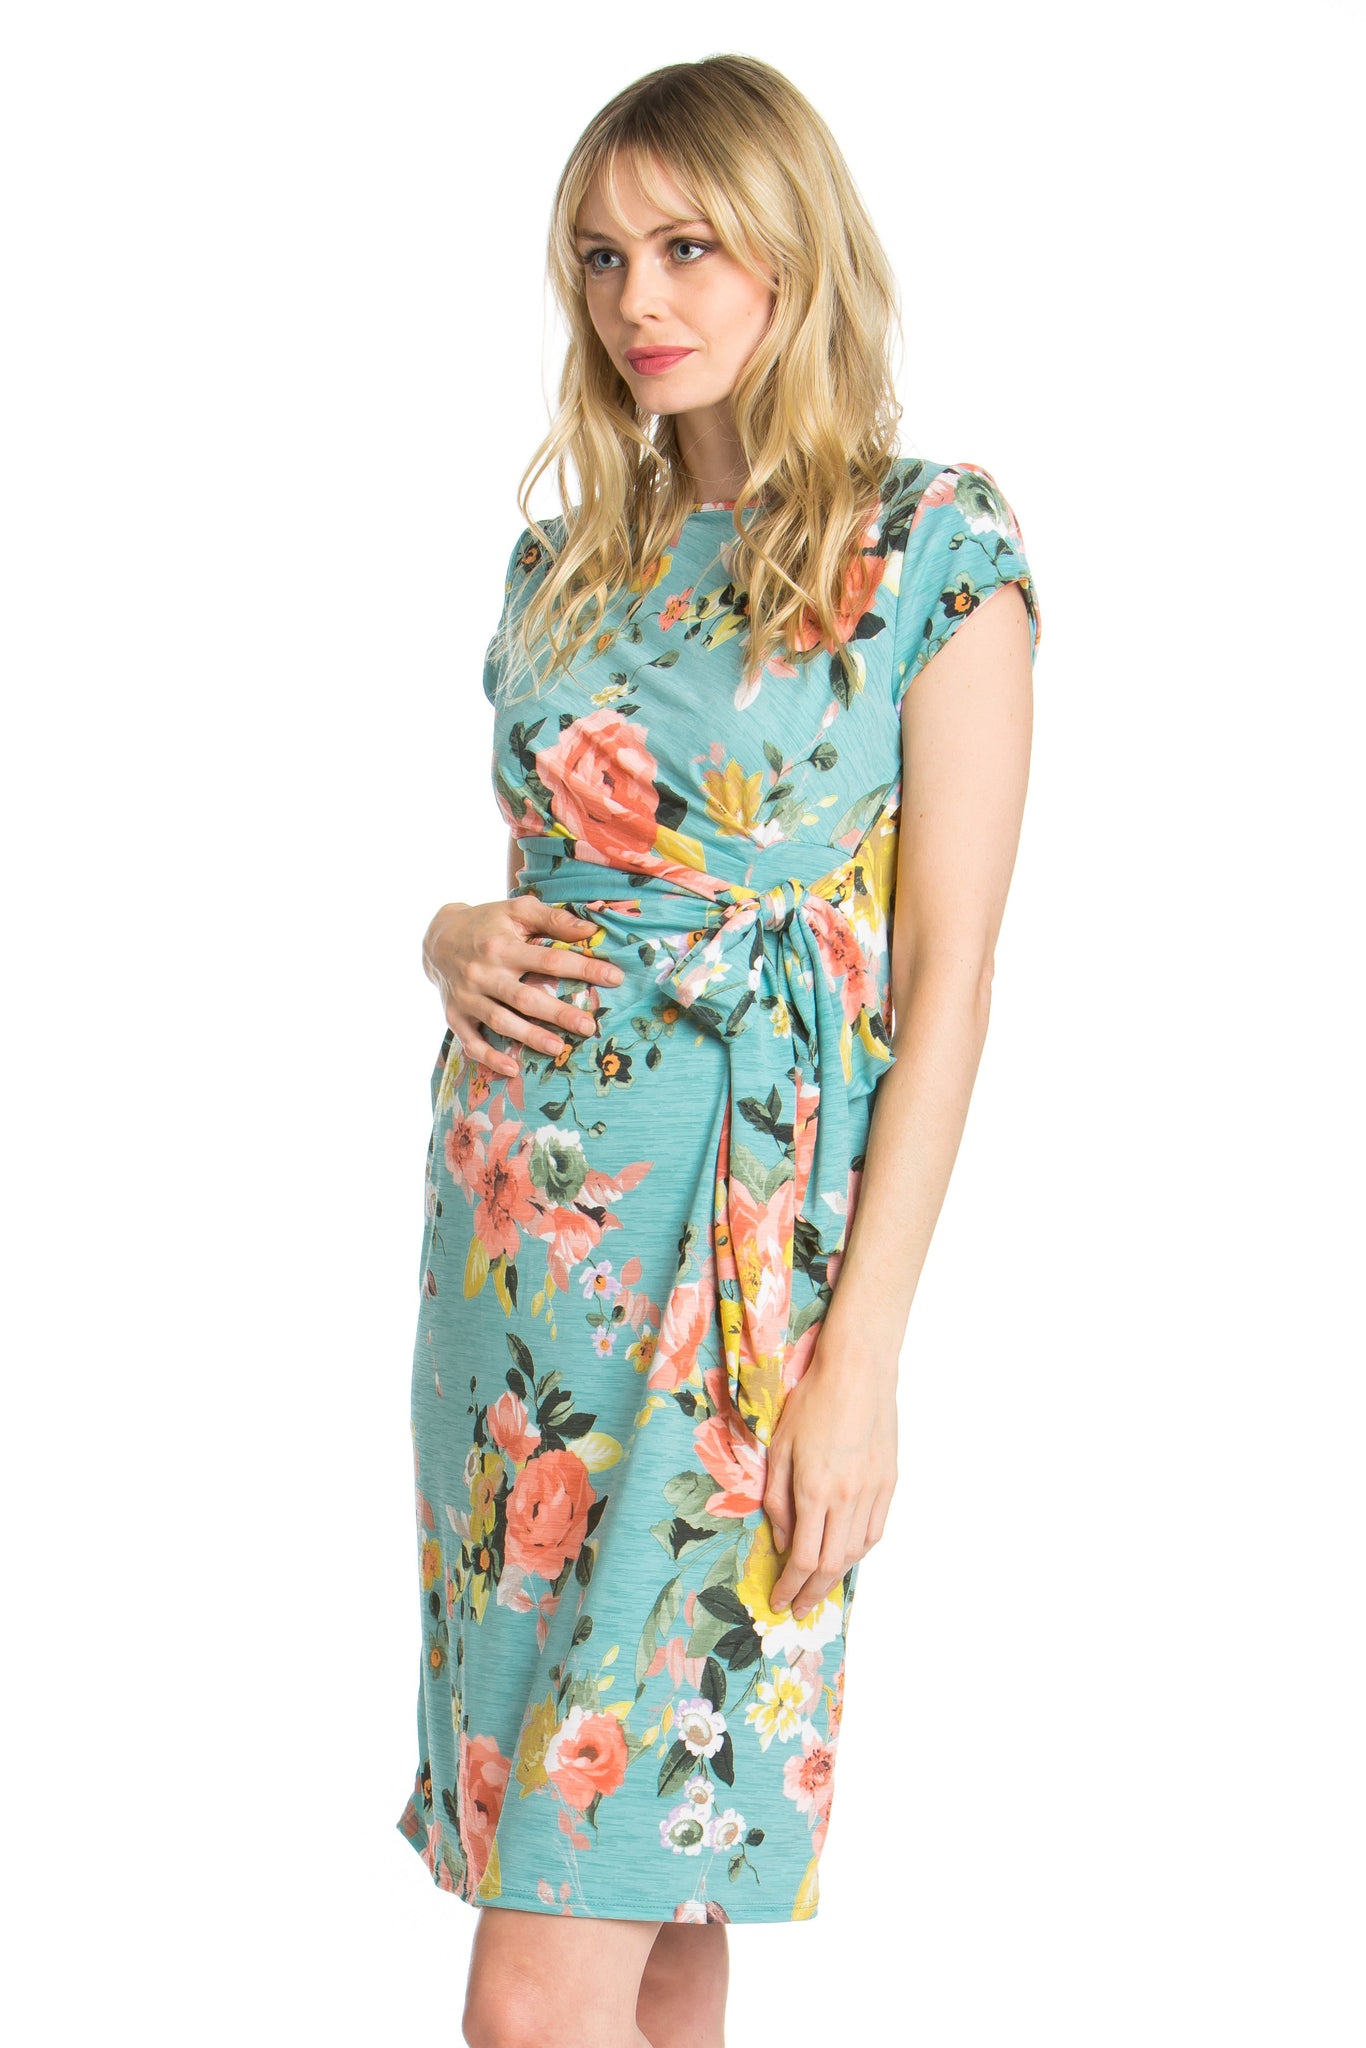 maternity pregnancy baby shower floral relaxed short sleeve round neck midi summer cocktail bow tie dress